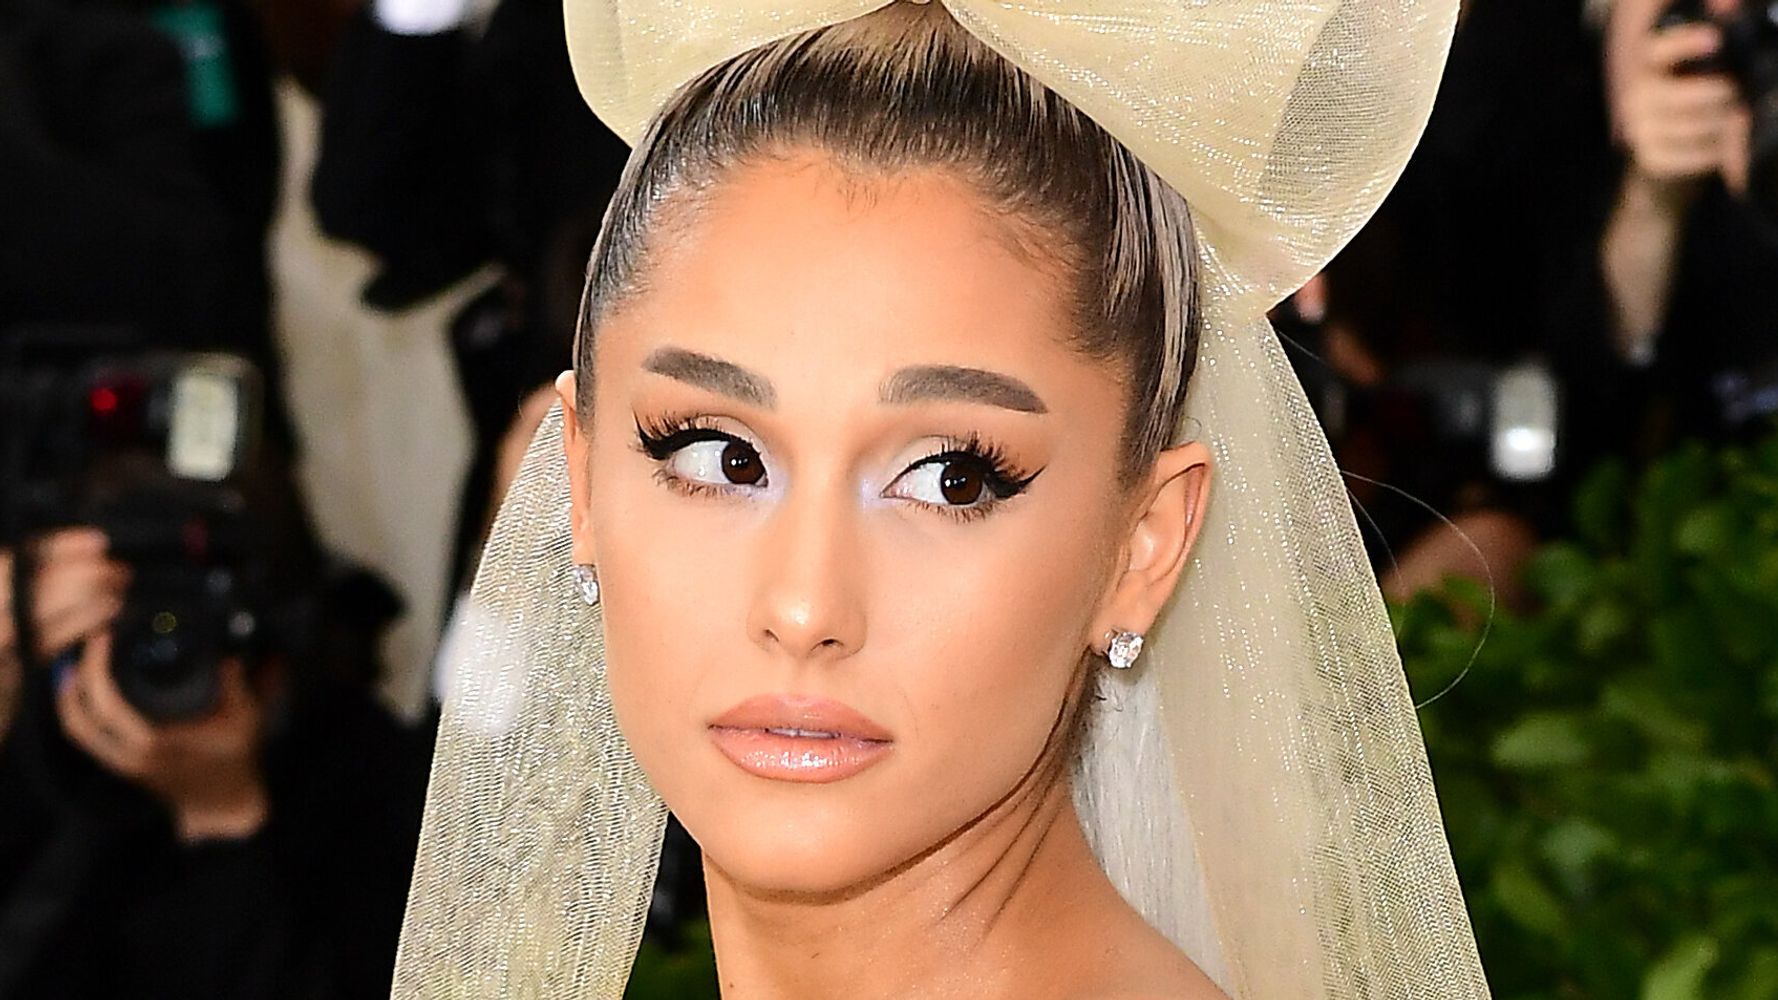 Fans Not Impressed With New Ariana Grande Madame Tussauds Wax Figure